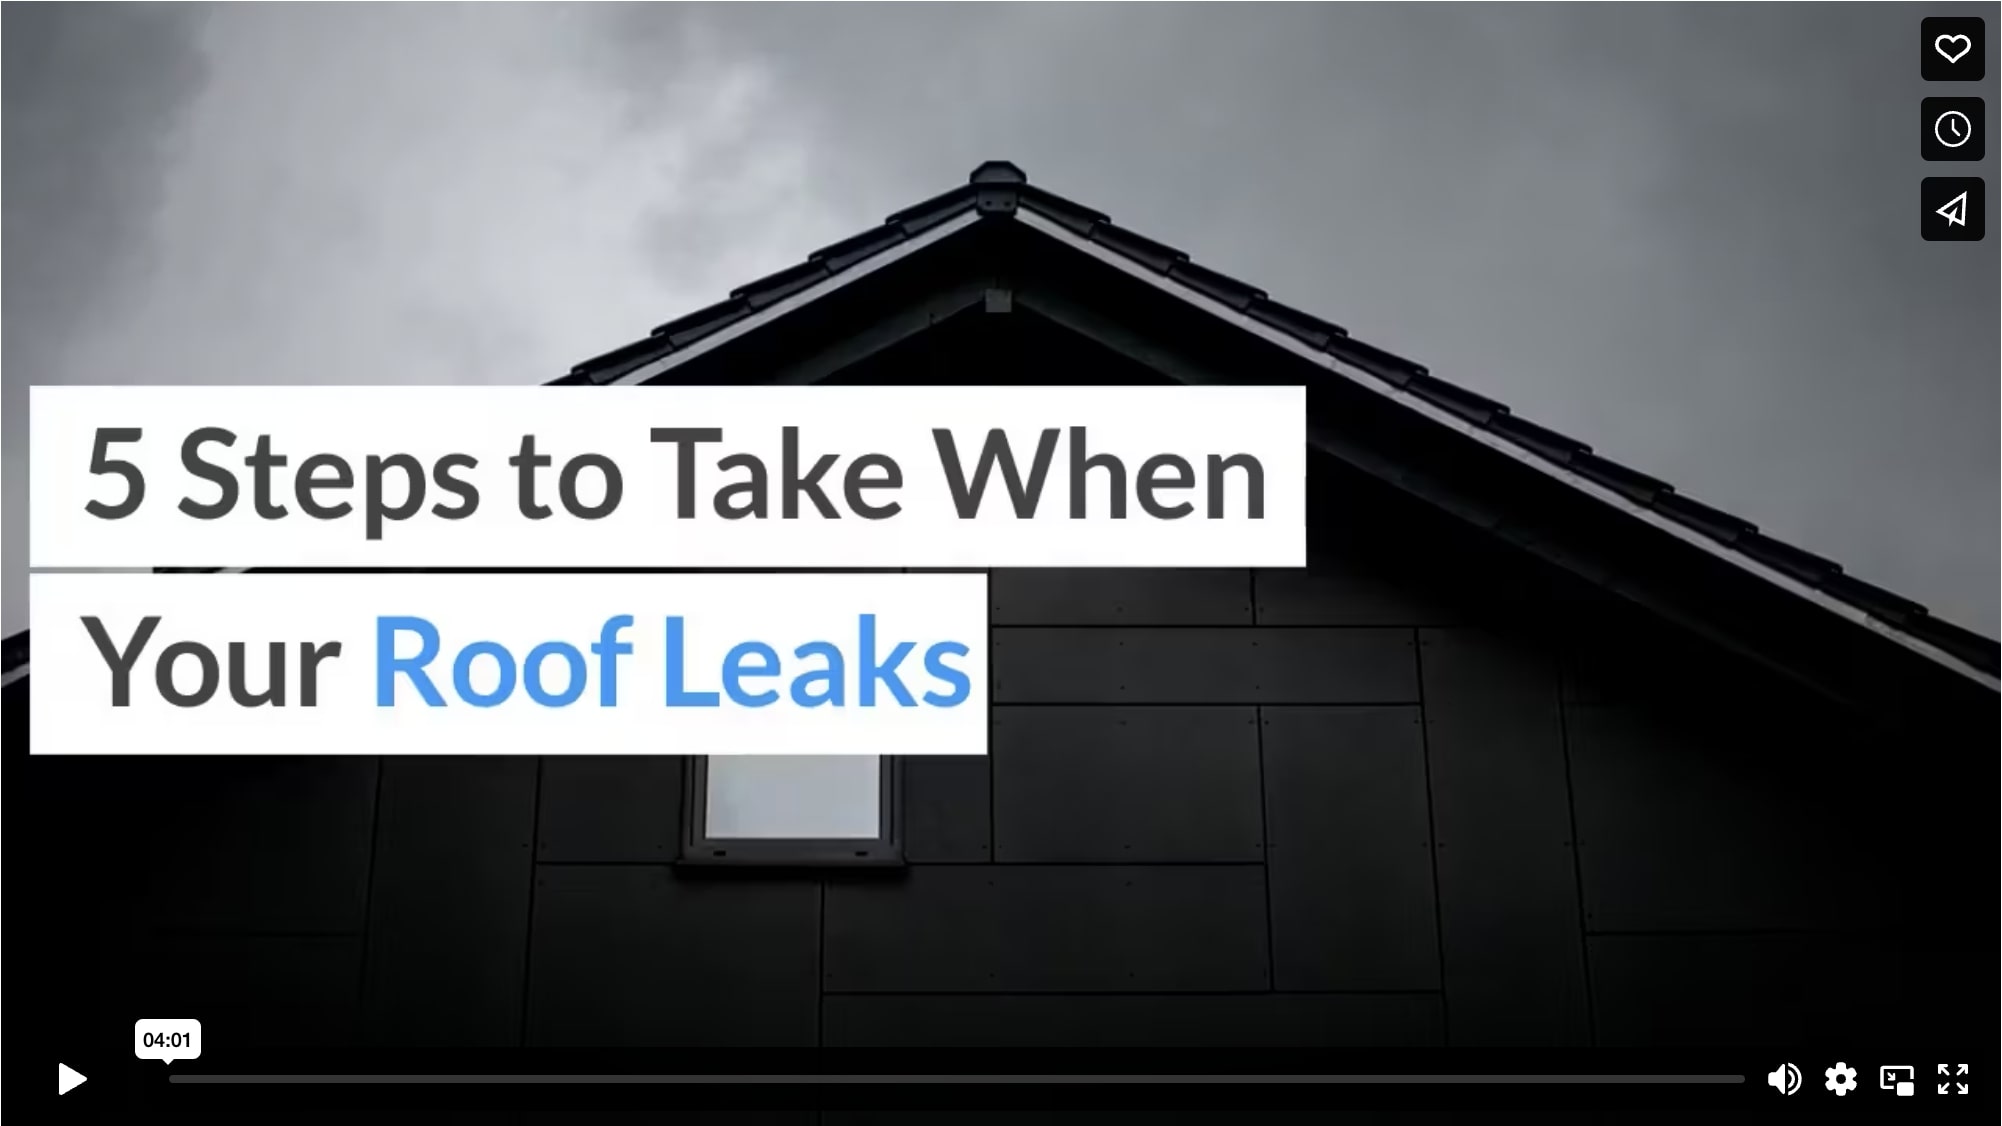 5 Steps to Take When Your Roof Leaks